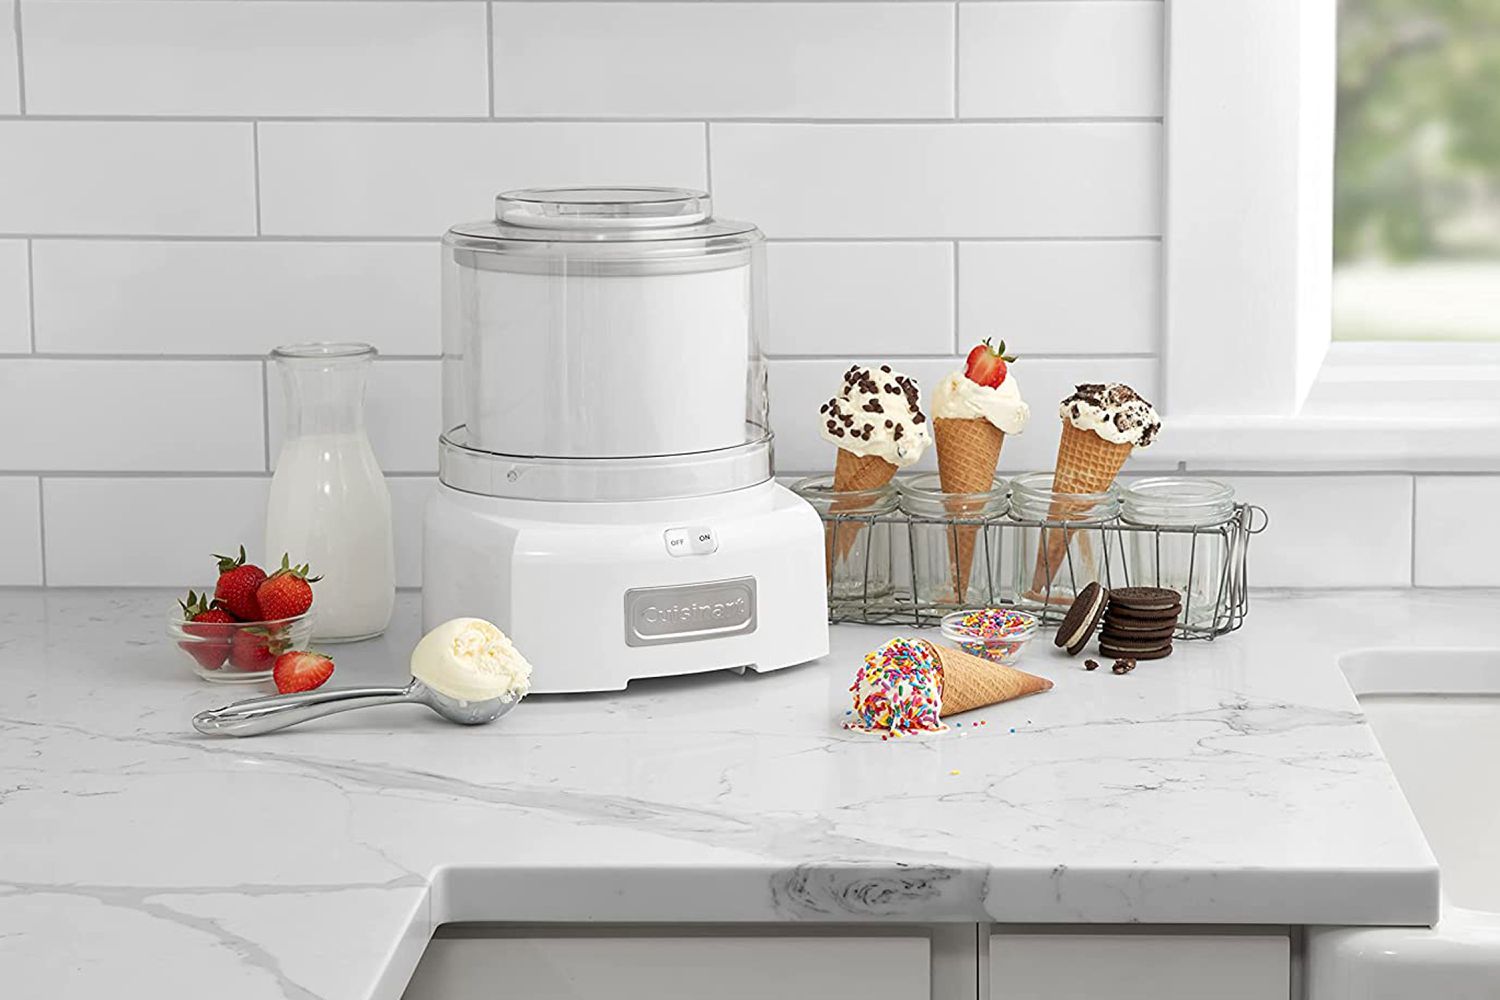 How To Use Cuisinart Ice Cream Maker